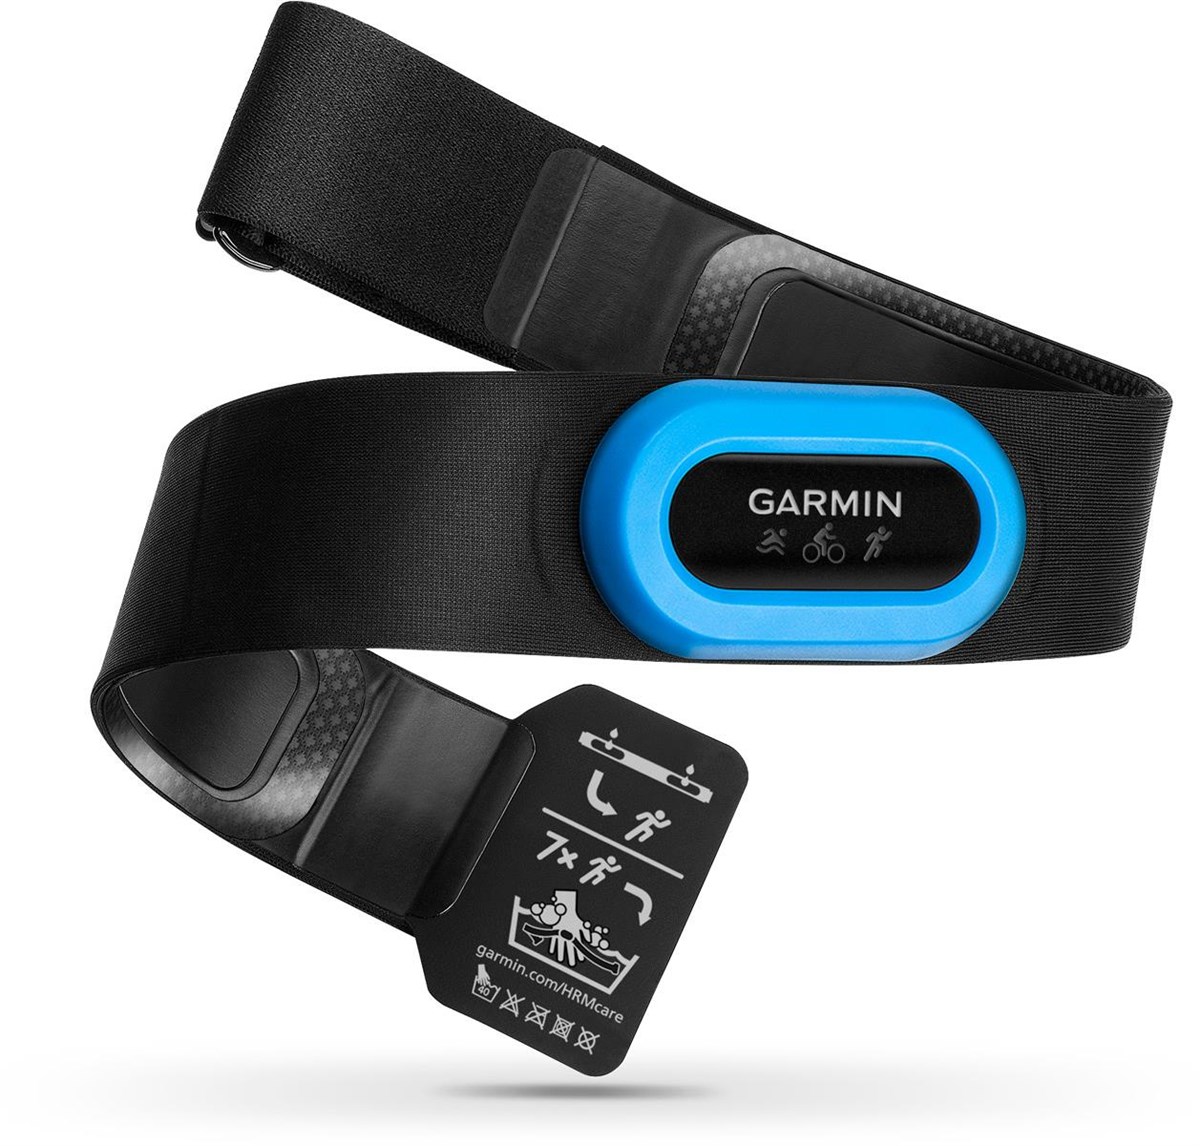 Garmin HRM-Tri Heart Rate Transmitter - For 920XT and Fenix 3 product image